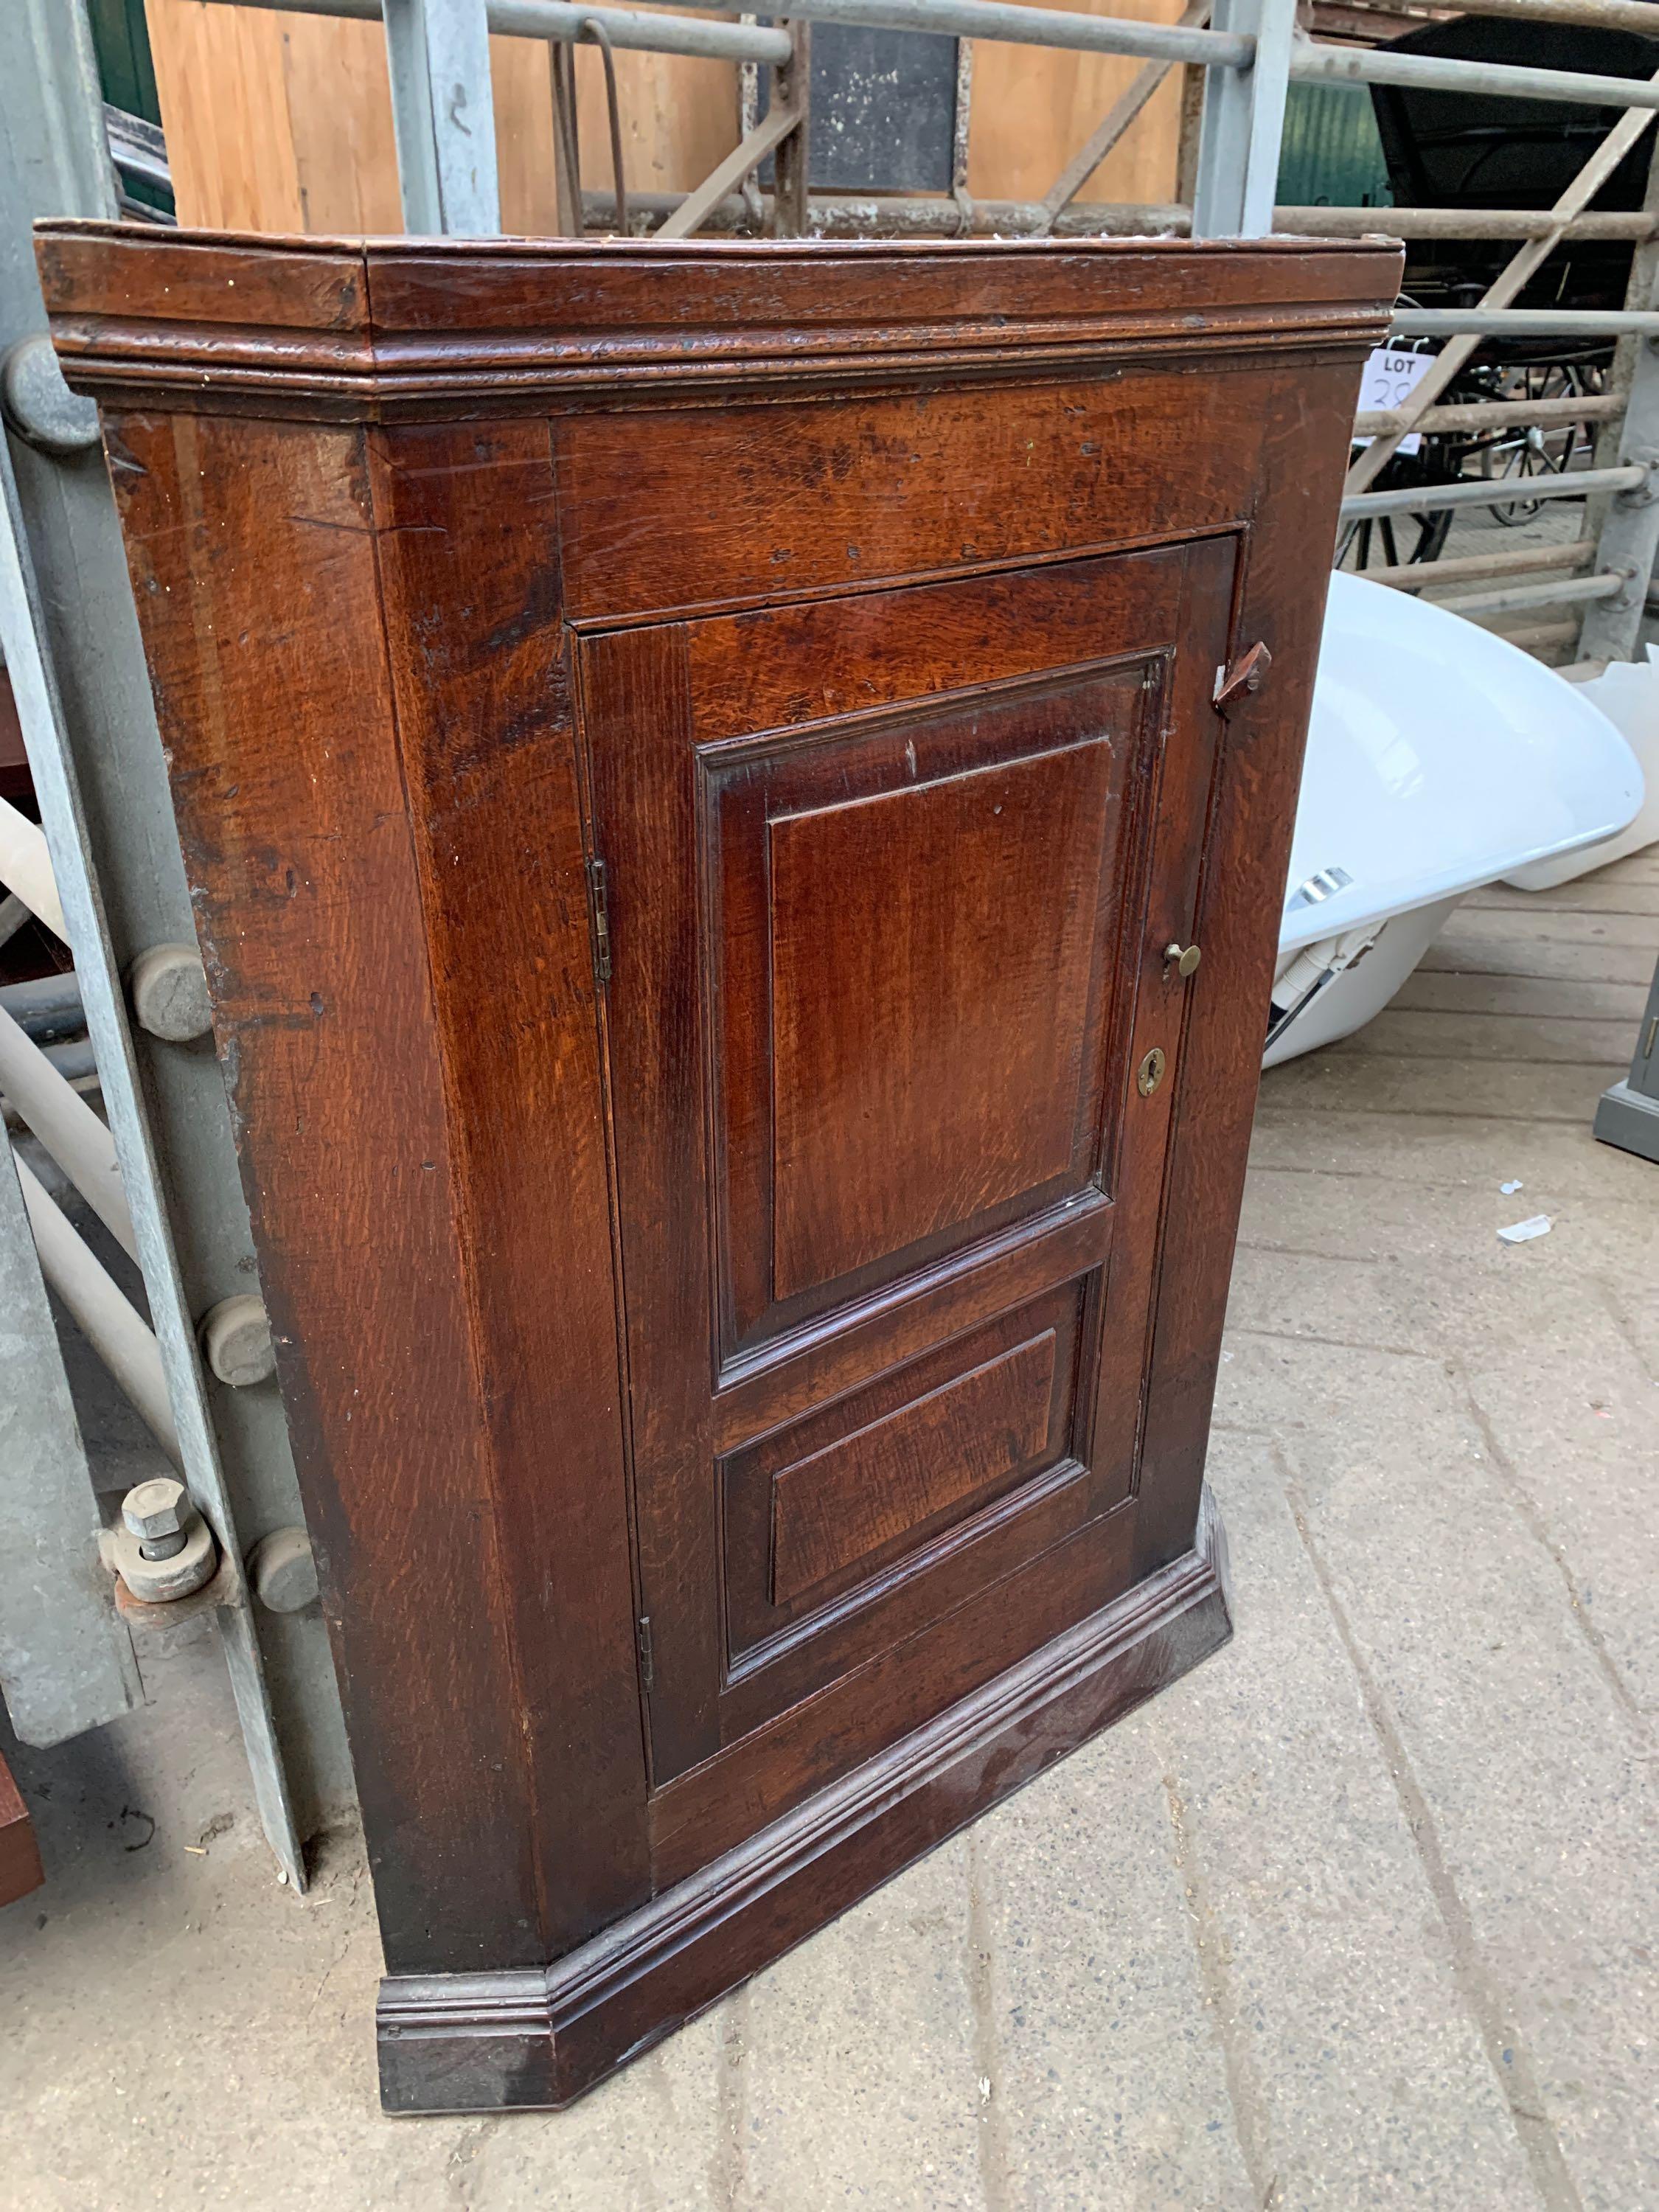 Oak arts and crafts style cupboard